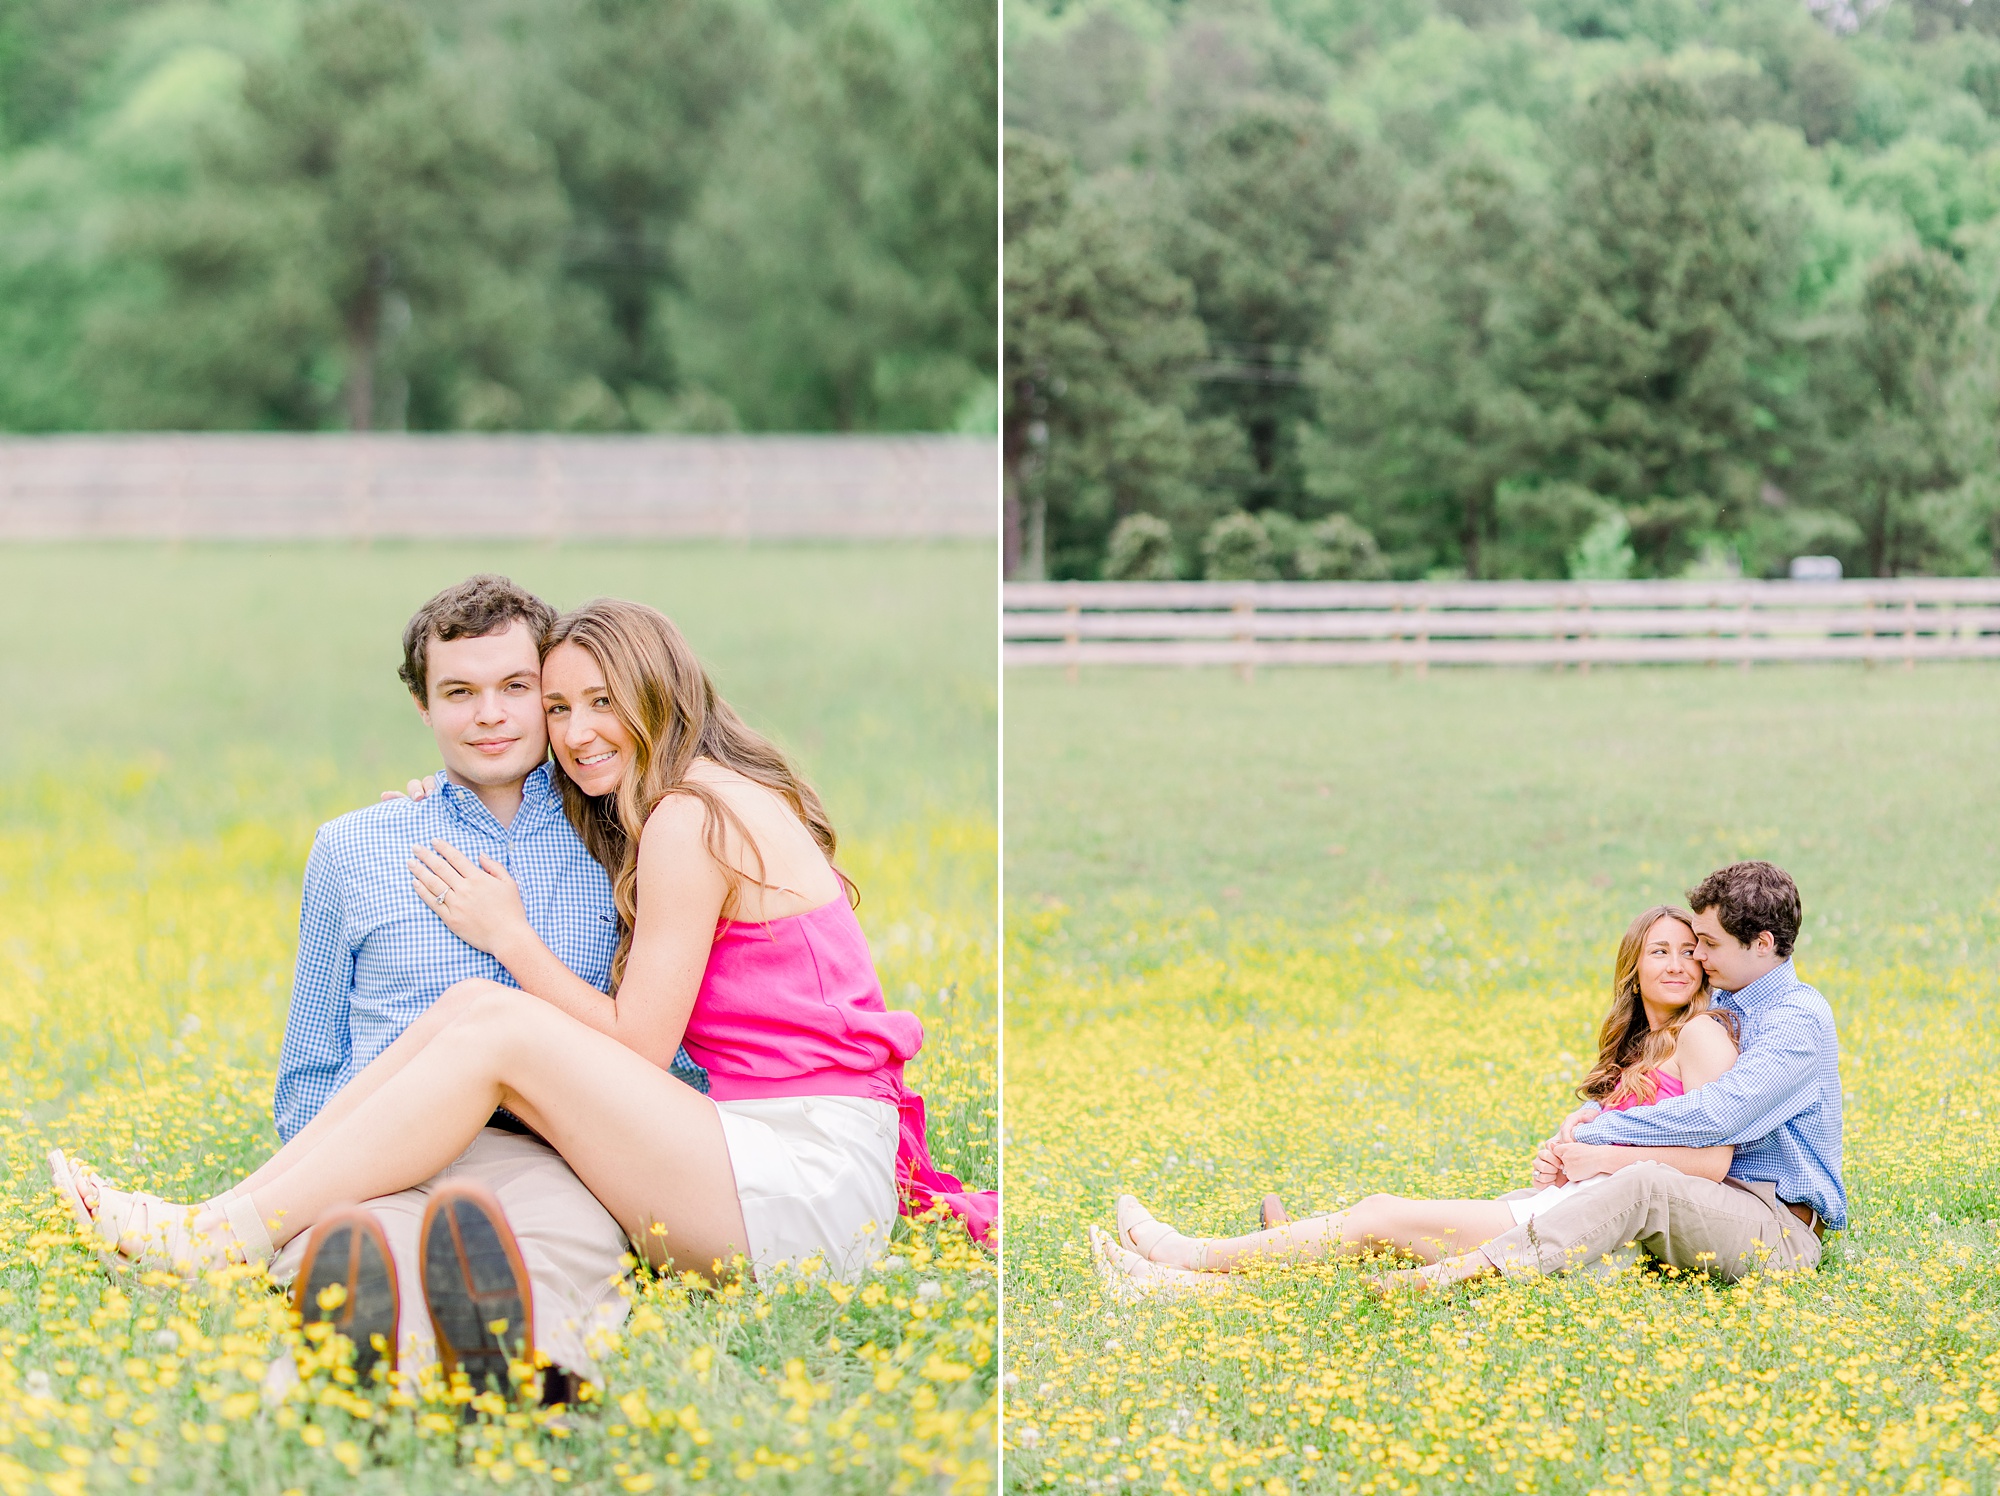 spring Birmingham AL engagement session with couple sitting in field of yellow flowers